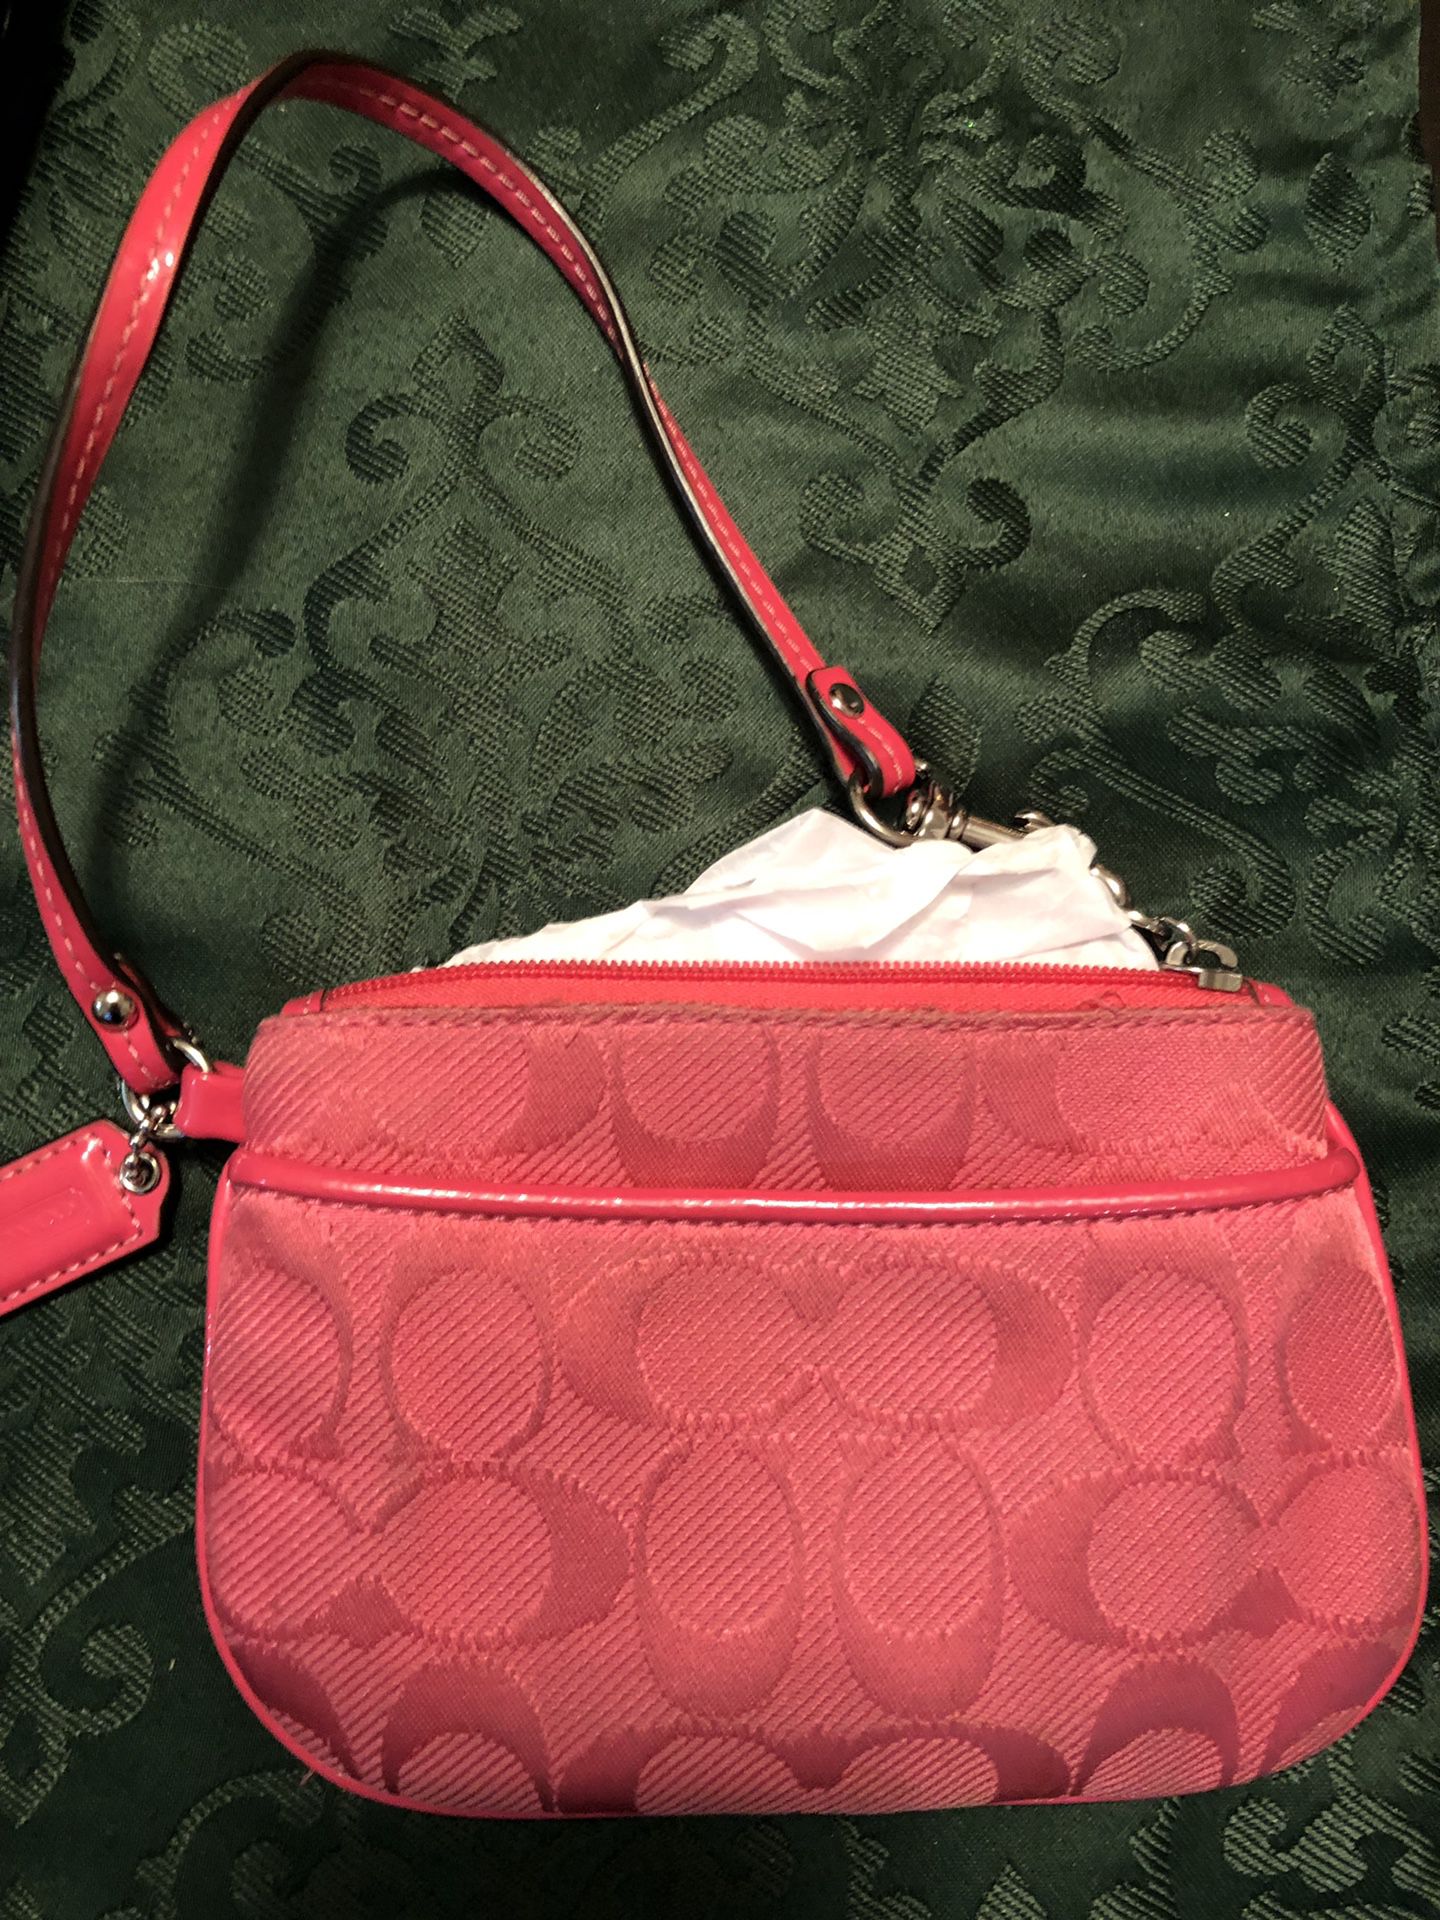 Brand New Authentic COACH pink wristlet